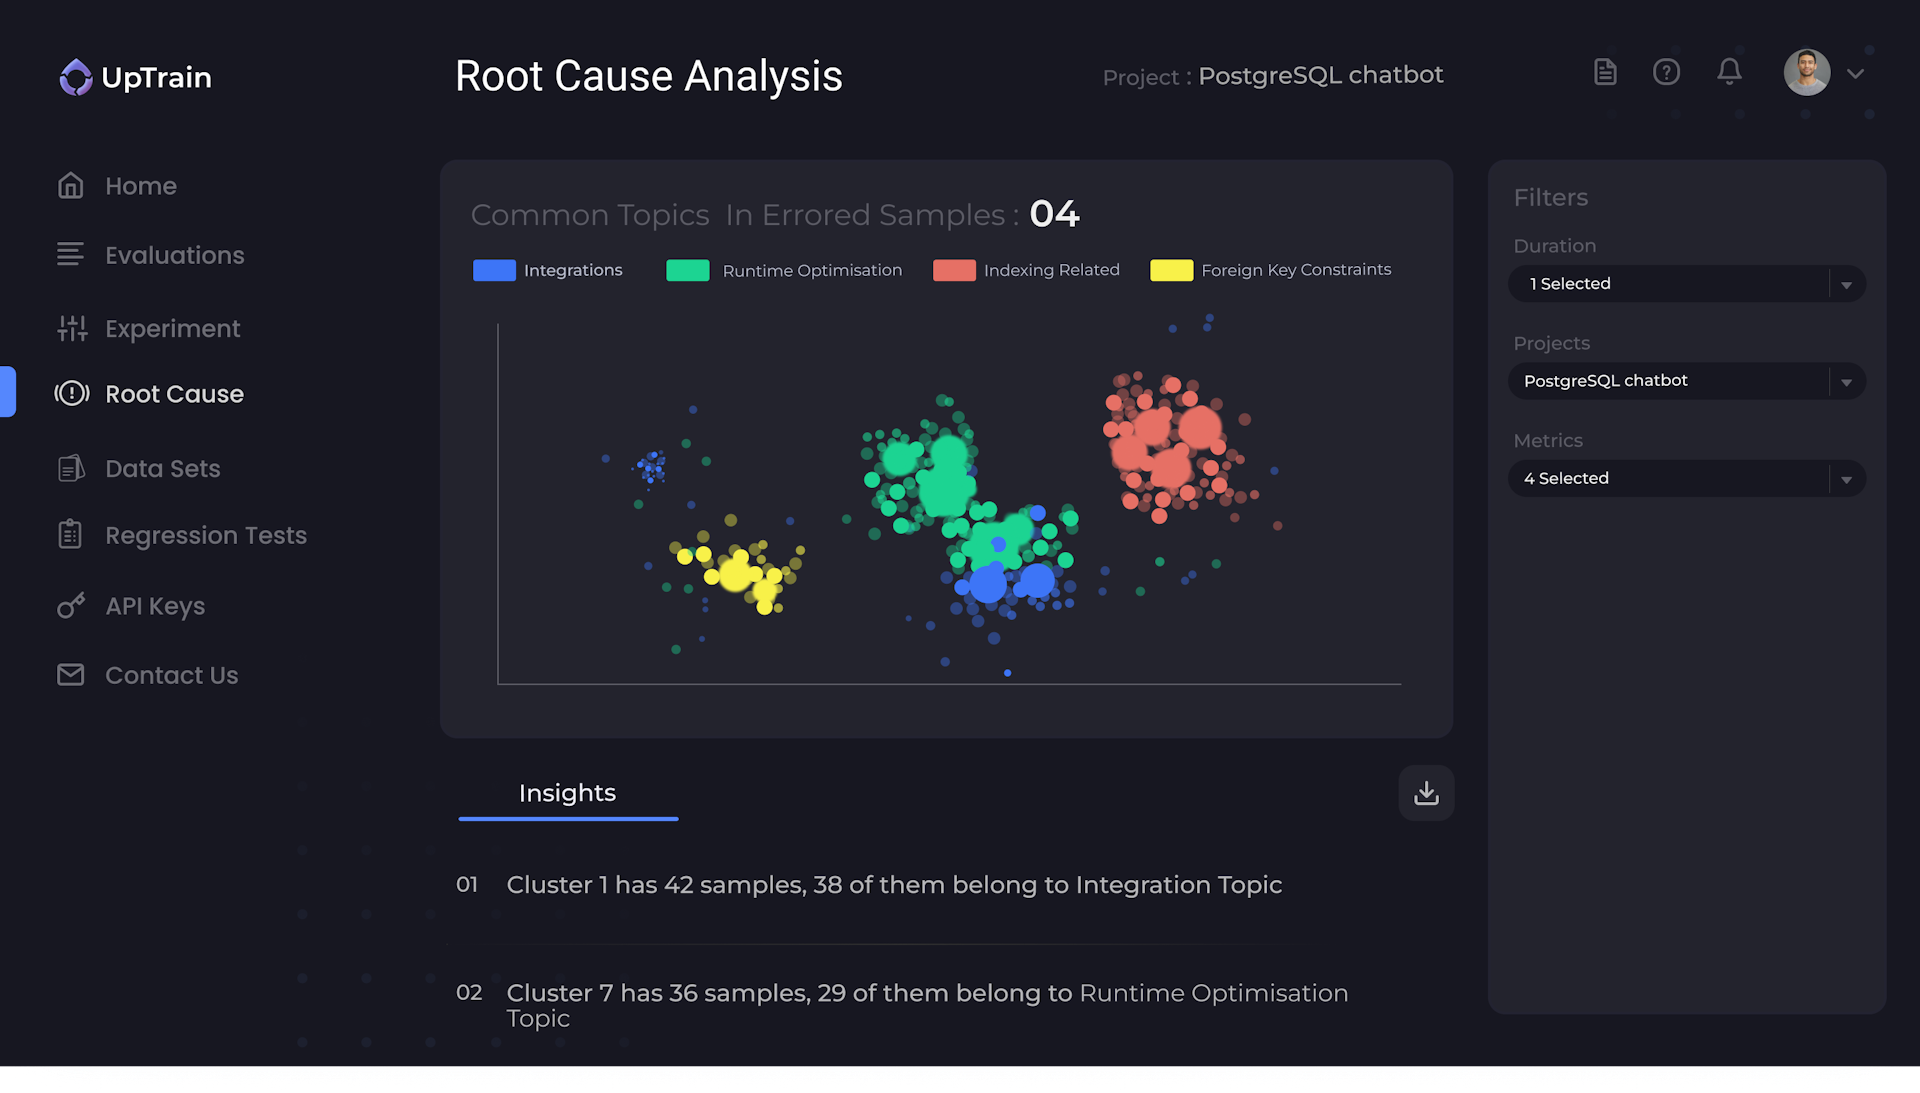 UpTrain dashboard for root cause analysis i.e. cases with low scores are evaluated across multiple checks, assigned underlying cause for failure and extracted common patterns among them